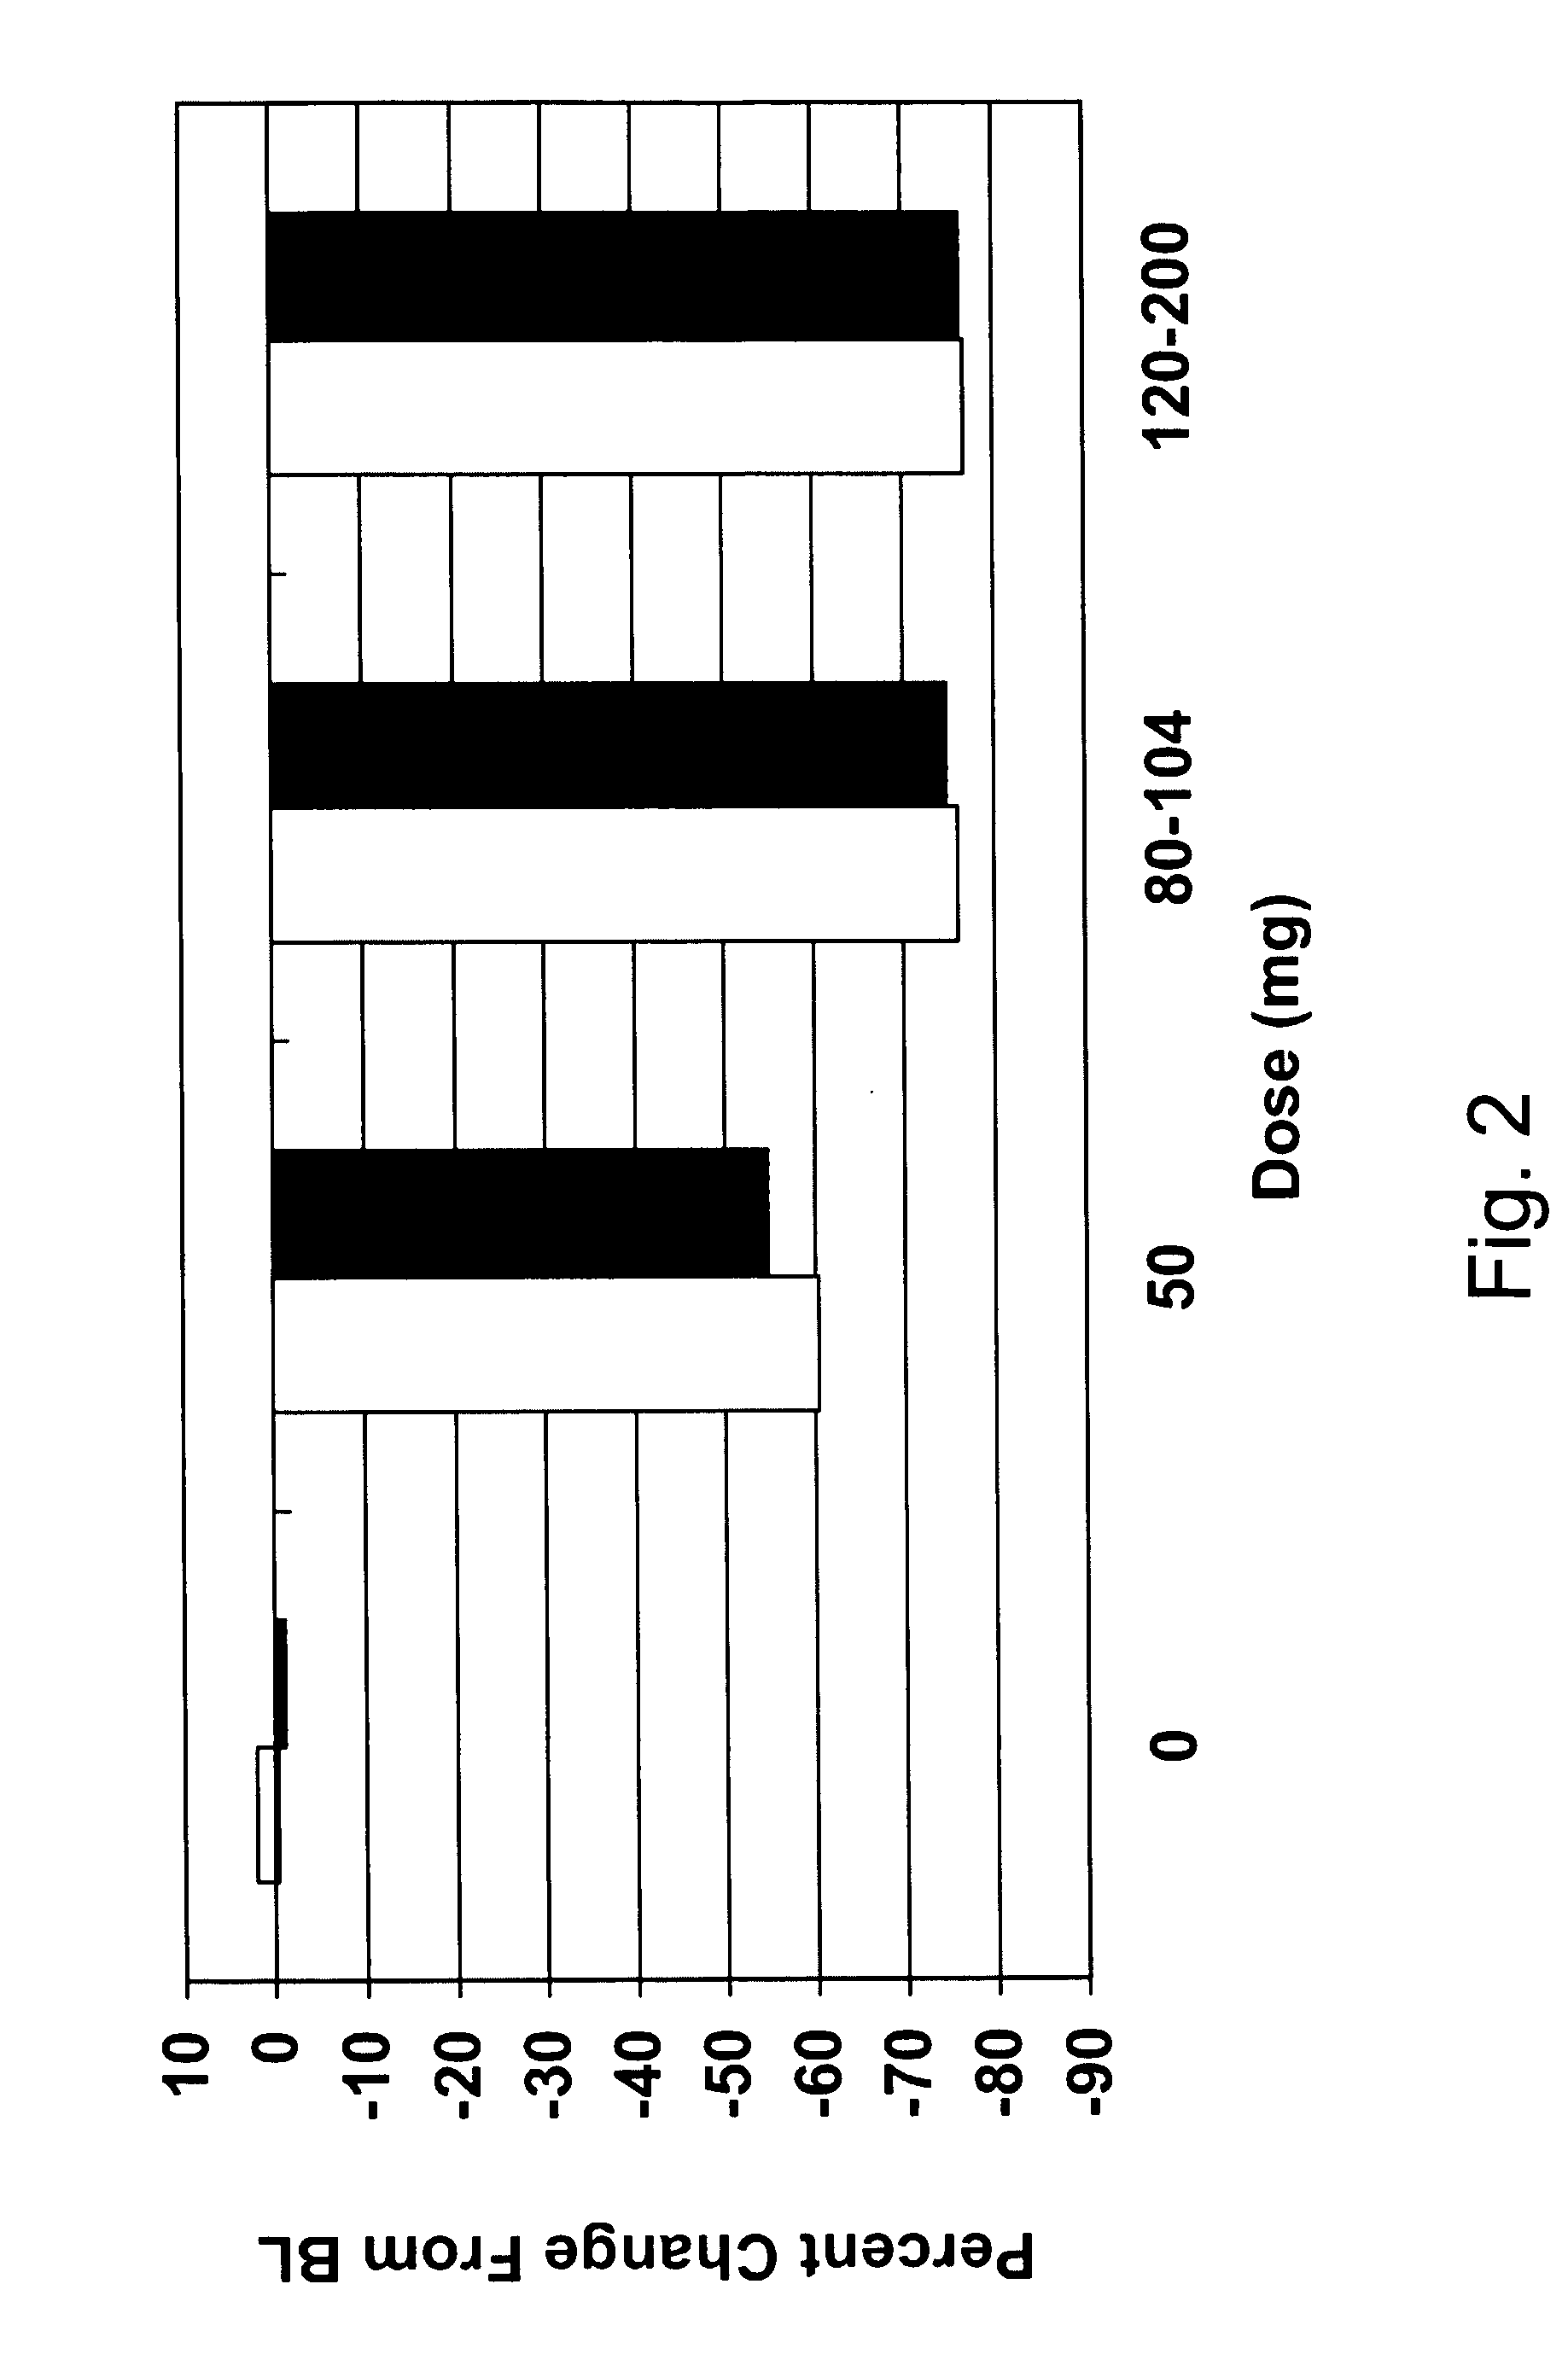 Methods of using IL-1 antagonists to reduce C-reactive protein